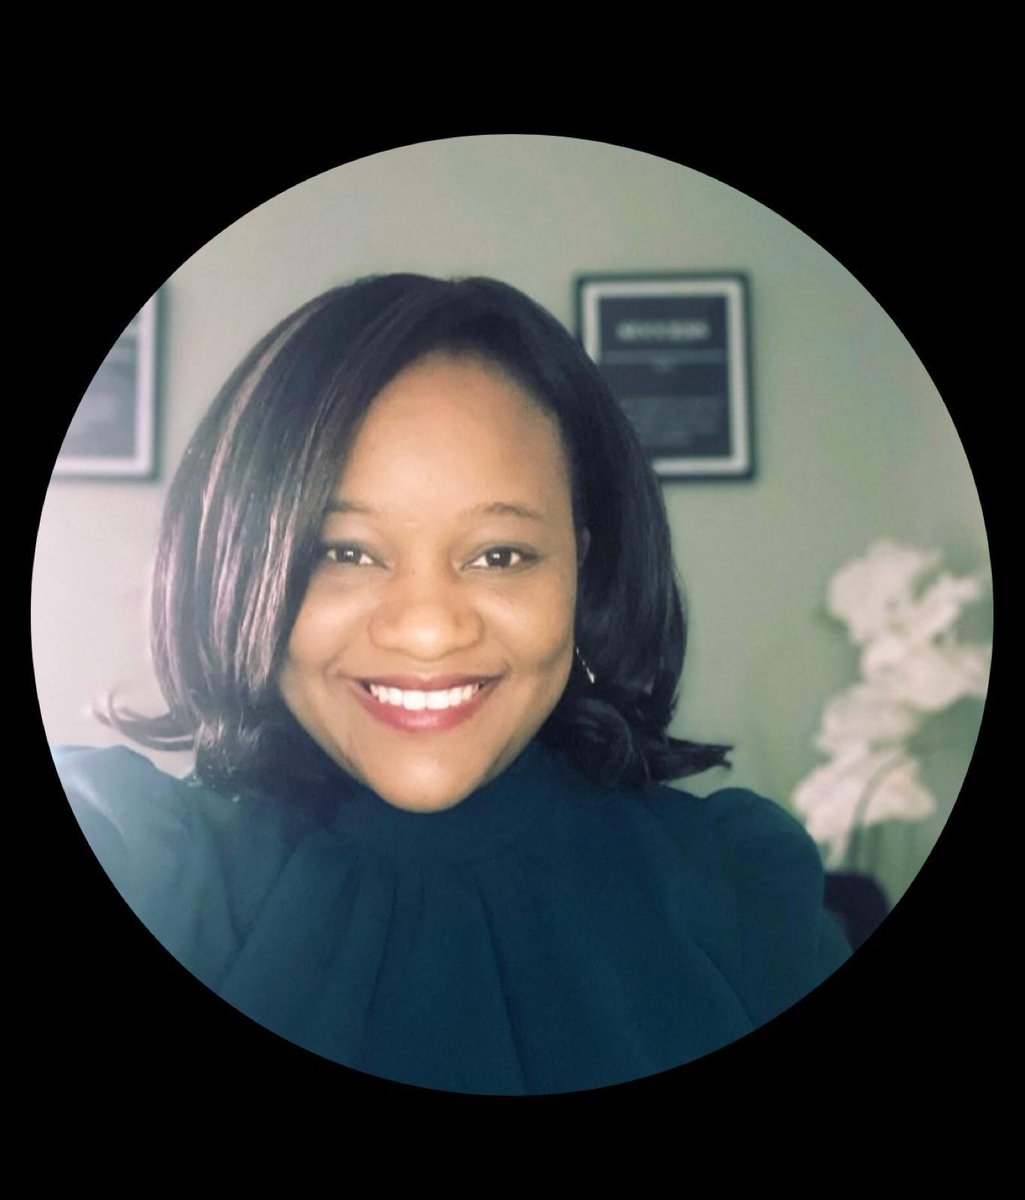 #WomensMonth Dr. Wadzanai Mboko @w_mboko is an infectious disease scientist with 12 years experience of vaccine development. Dr Mboko has managed many projects such evaluating immunogenicity of adenovirus vector-based vaccines for pandemic influenza strains. PhD  @MedicalCollege